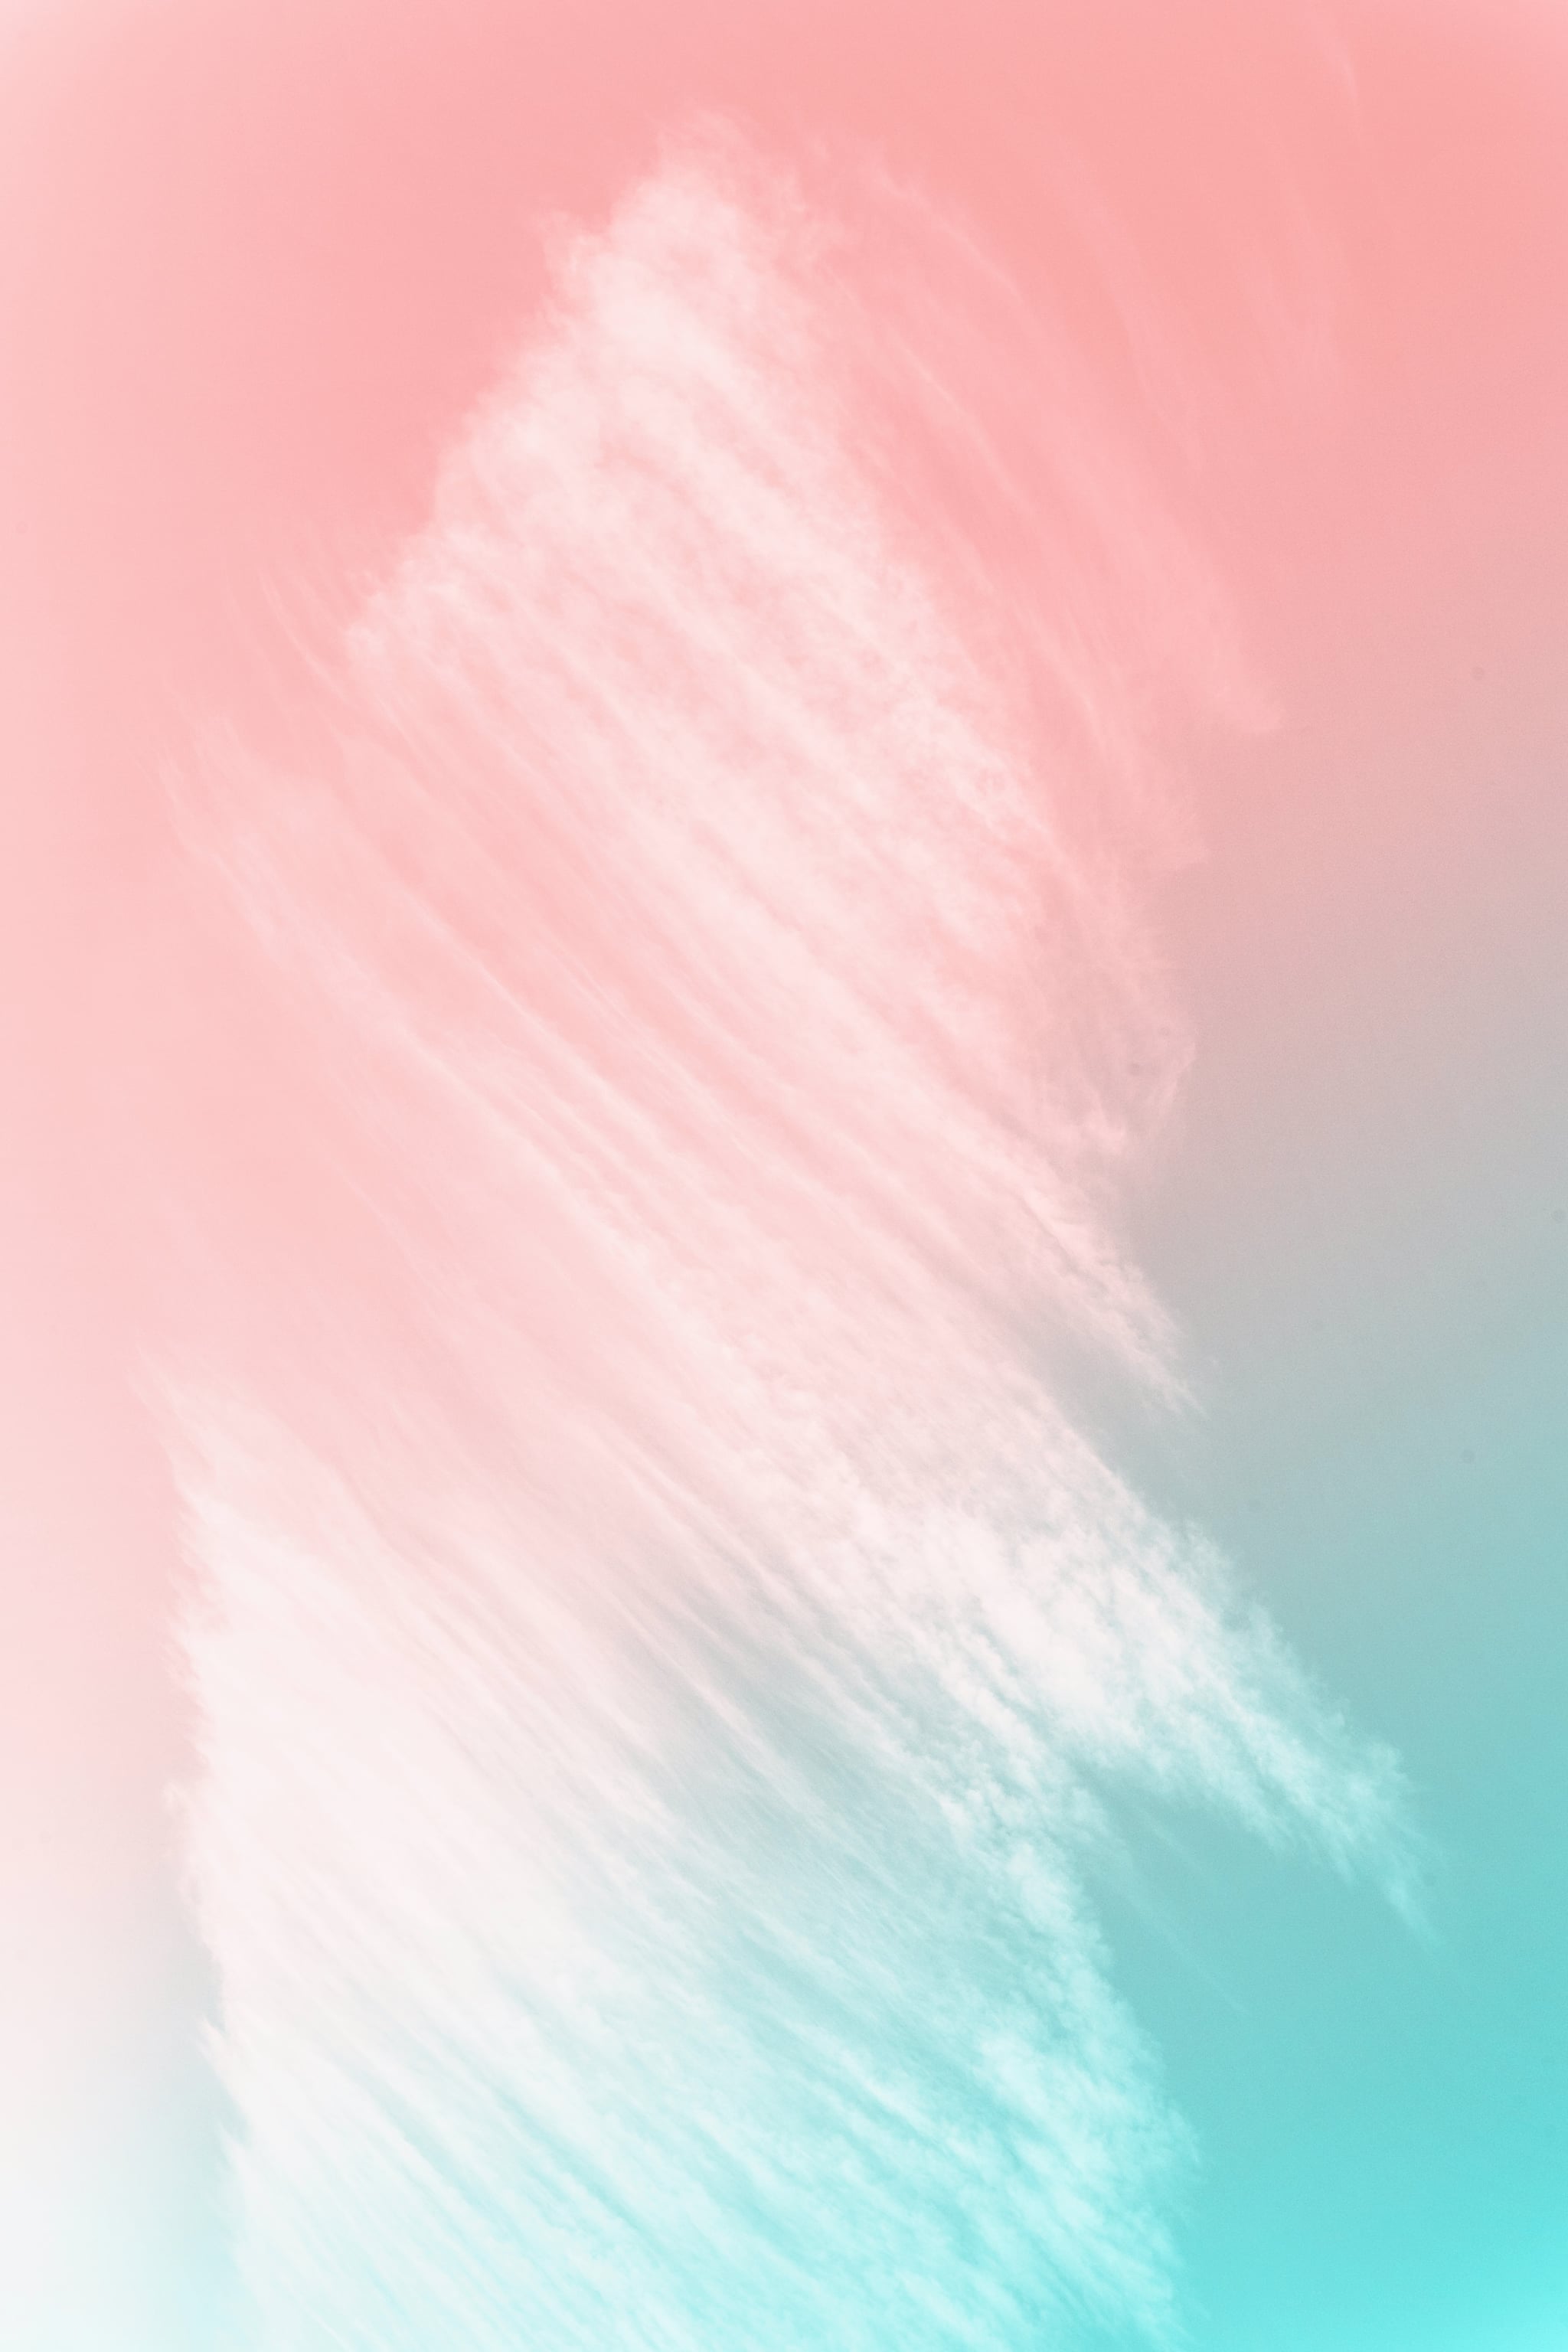 A pink and blue abstract image - IPhone, colorful, cute iPhone, pastel, pastel rainbow, pastel pink, pastel minimalist